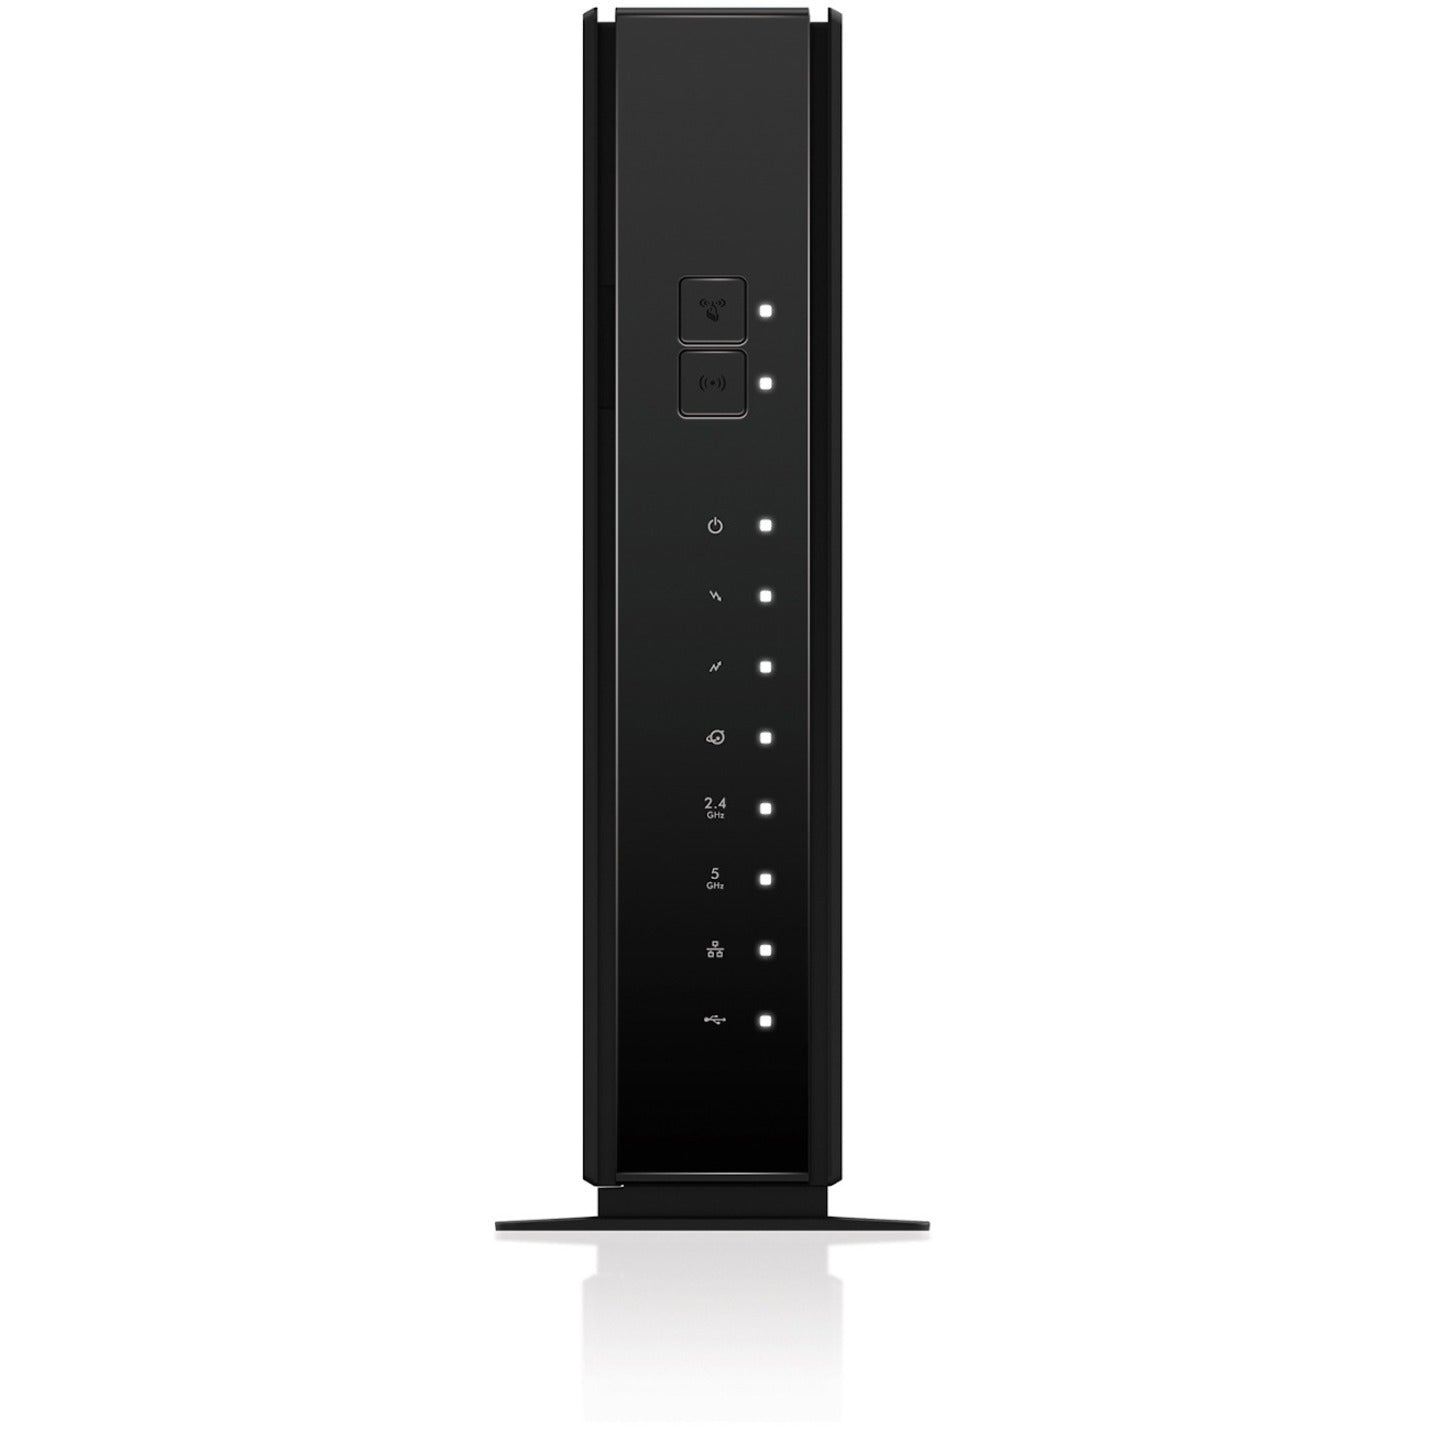 Netgear AC1200 WiFi Cable Modem Router - High-Speed Internet and Reliable Connectivity [Discontinued]